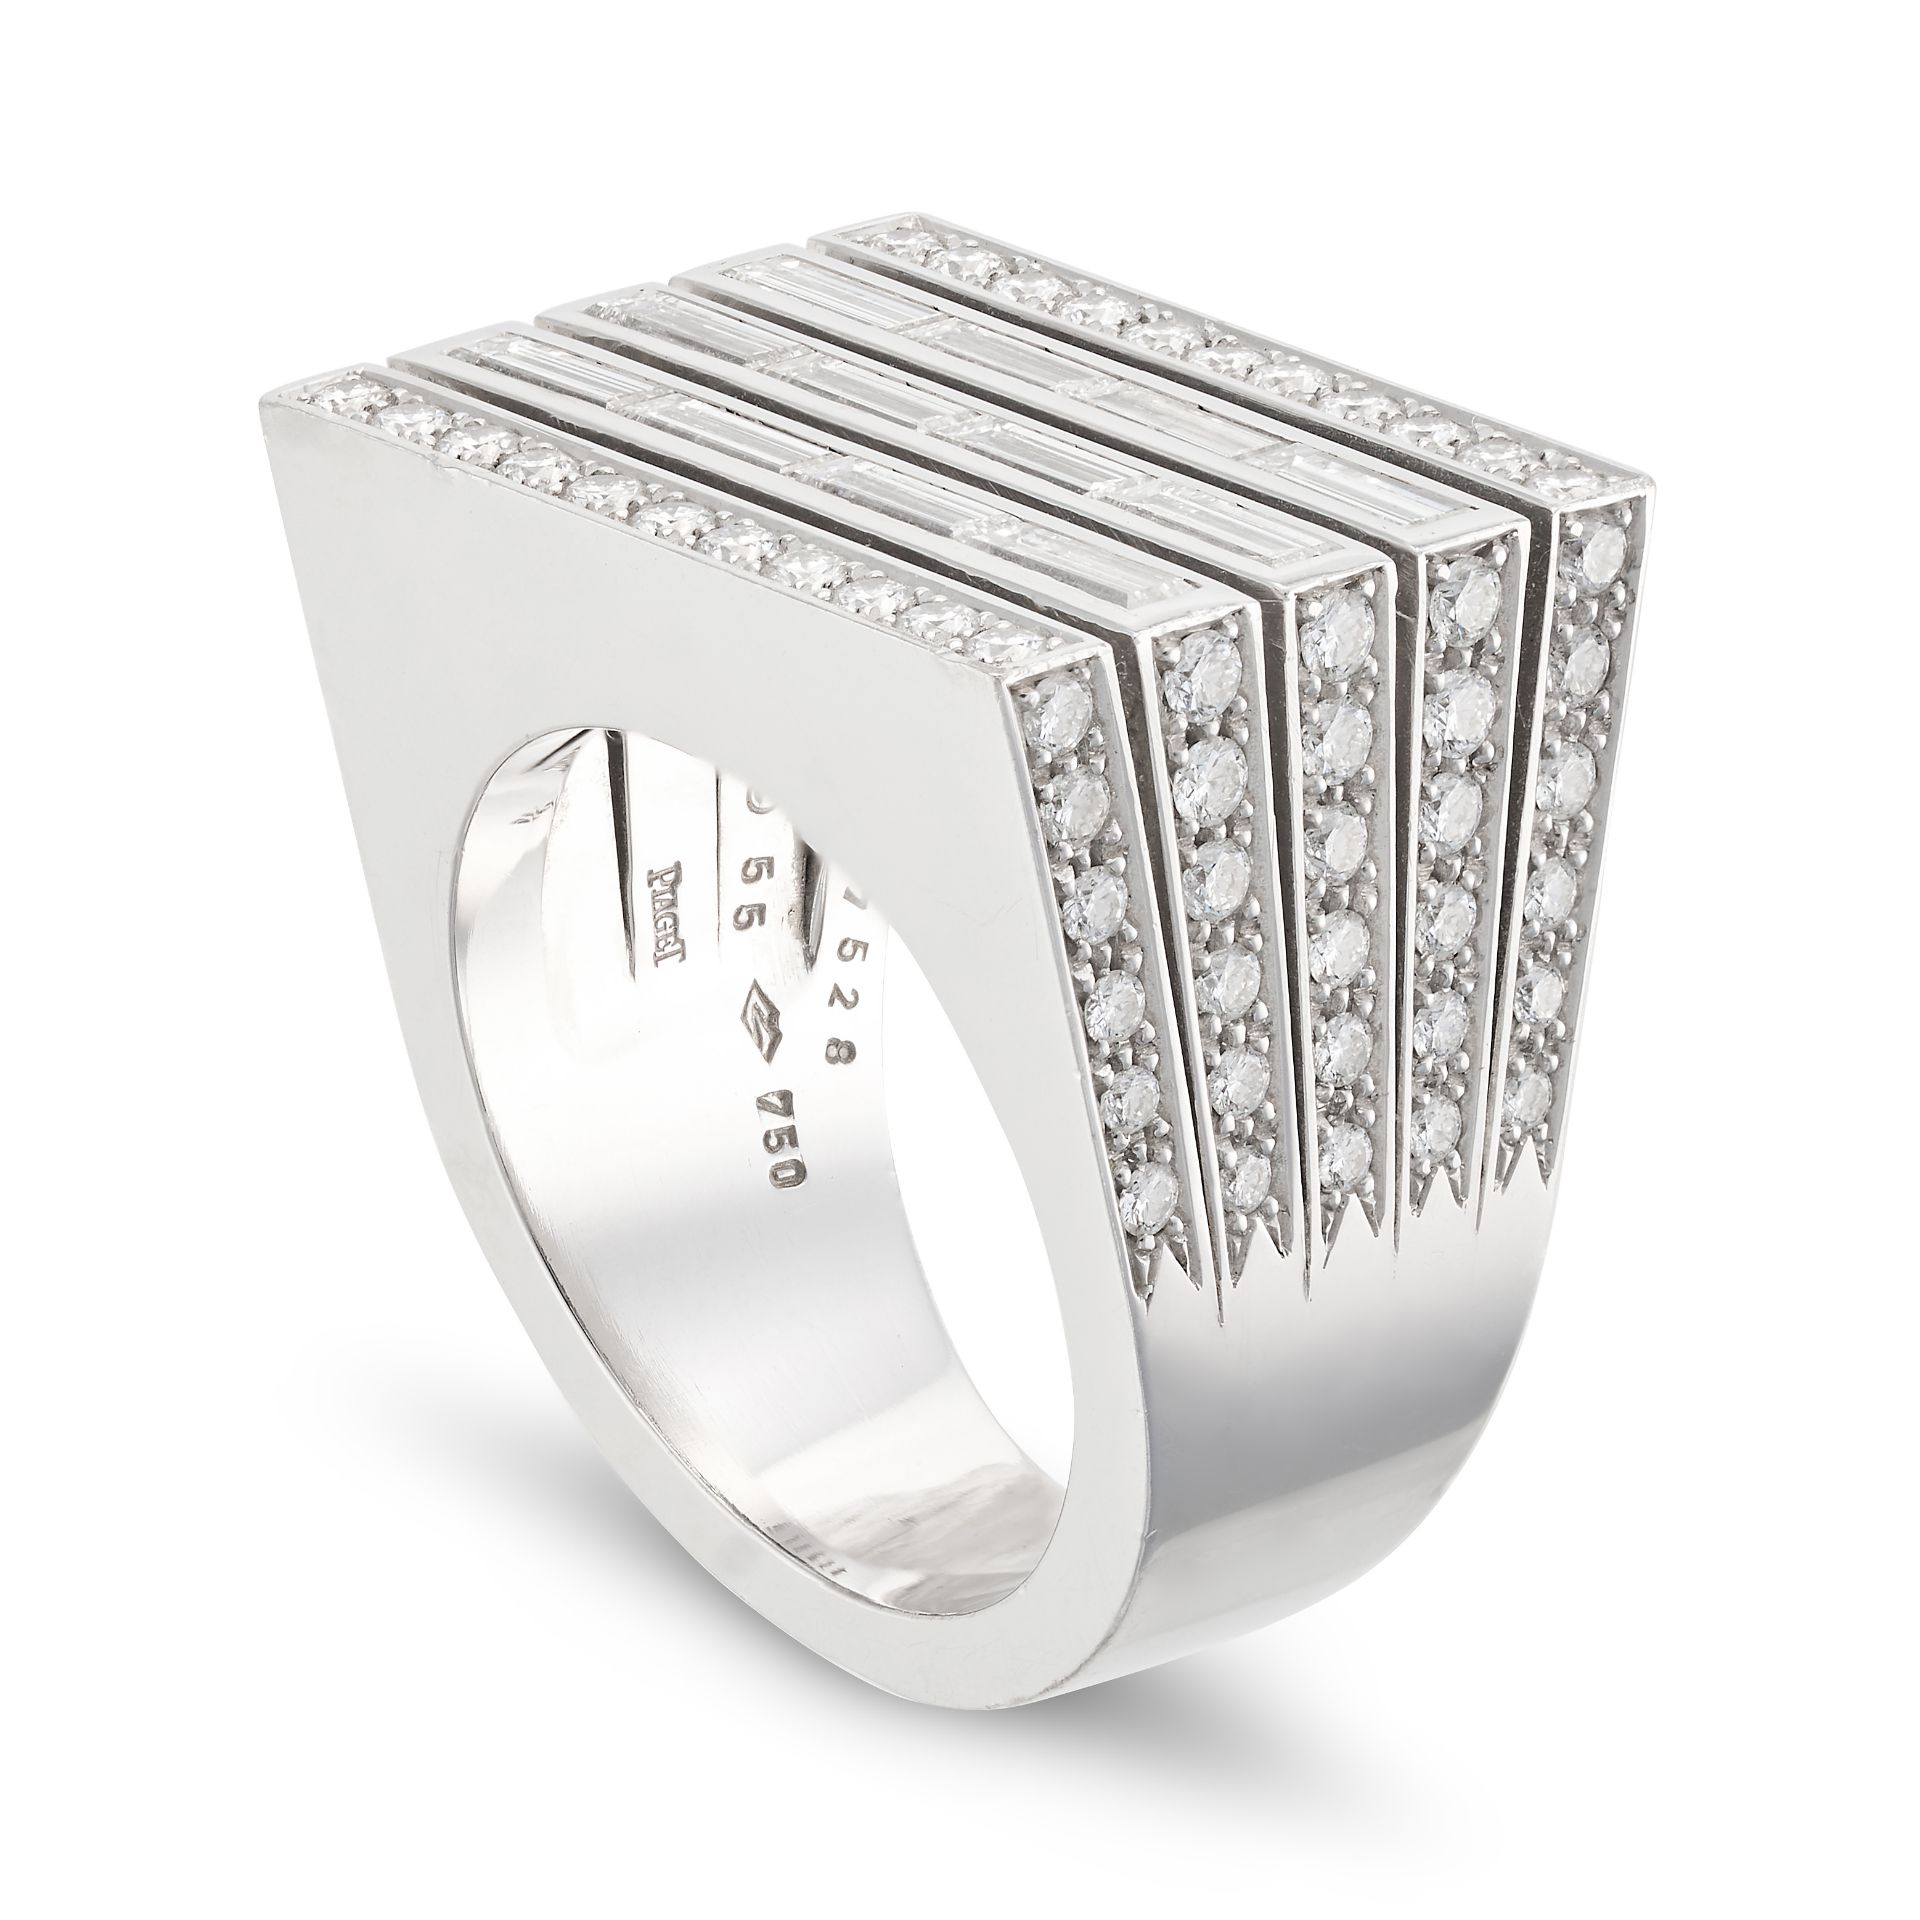 PIAGET, A DIAMOND FREEDOM RING set with three rows of baguette cut diamonds, accented by rows of ... - Bild 2 aus 2